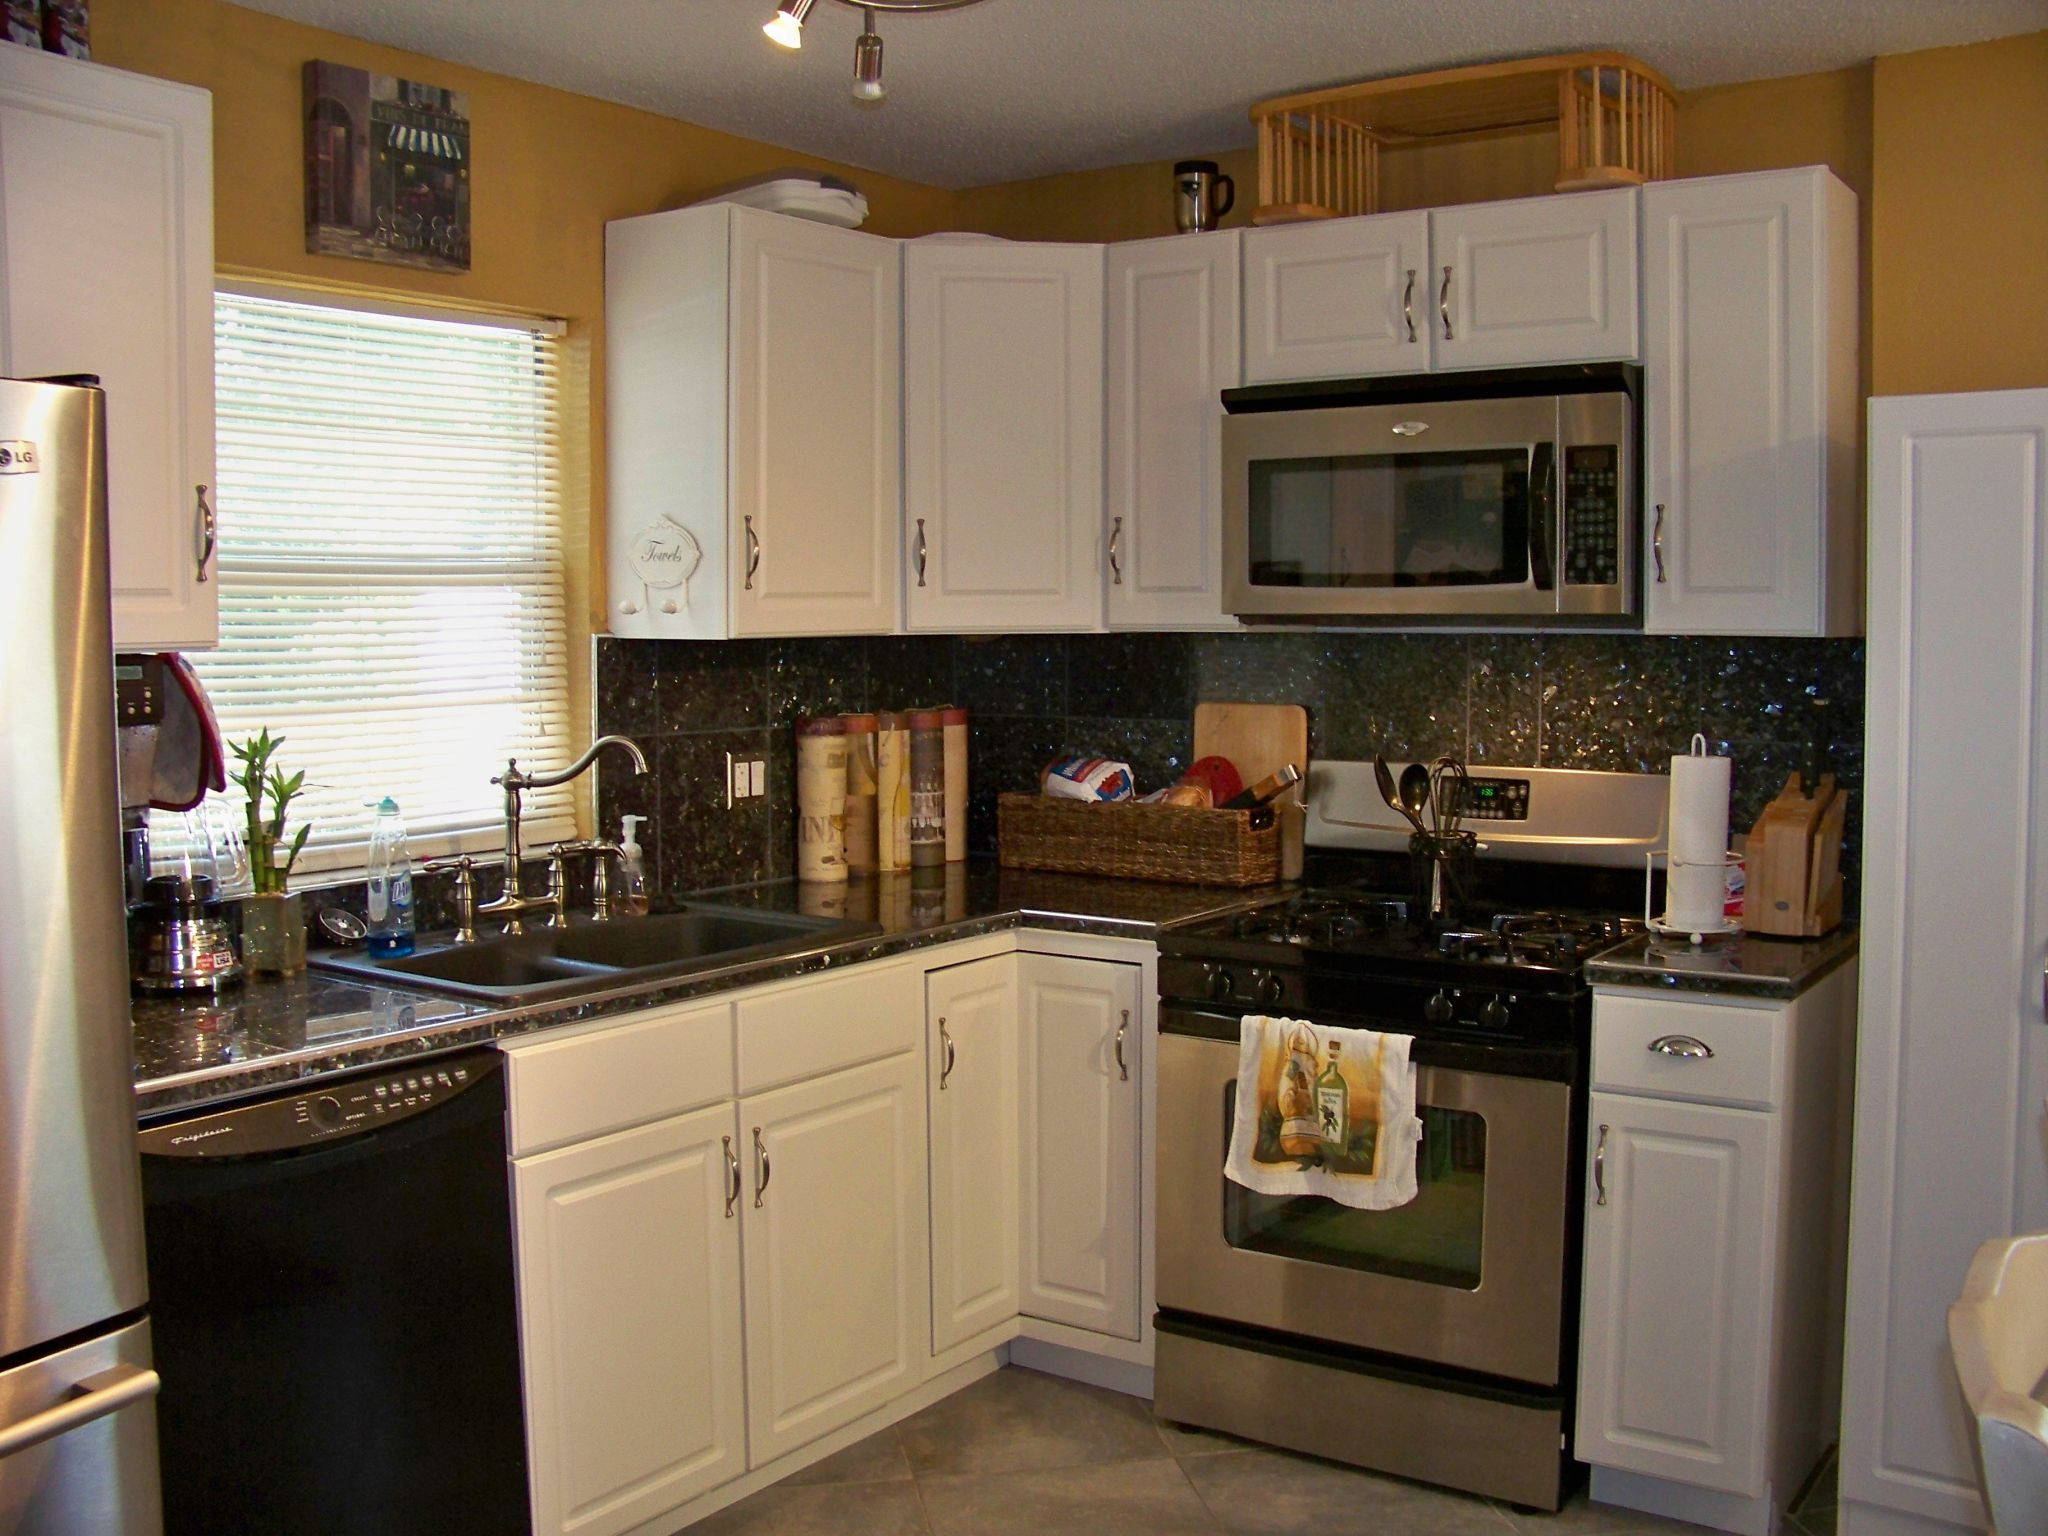 Used Kitchen Countertops
 Tips to Have Sleek and Neat Kitchen Countertop Options